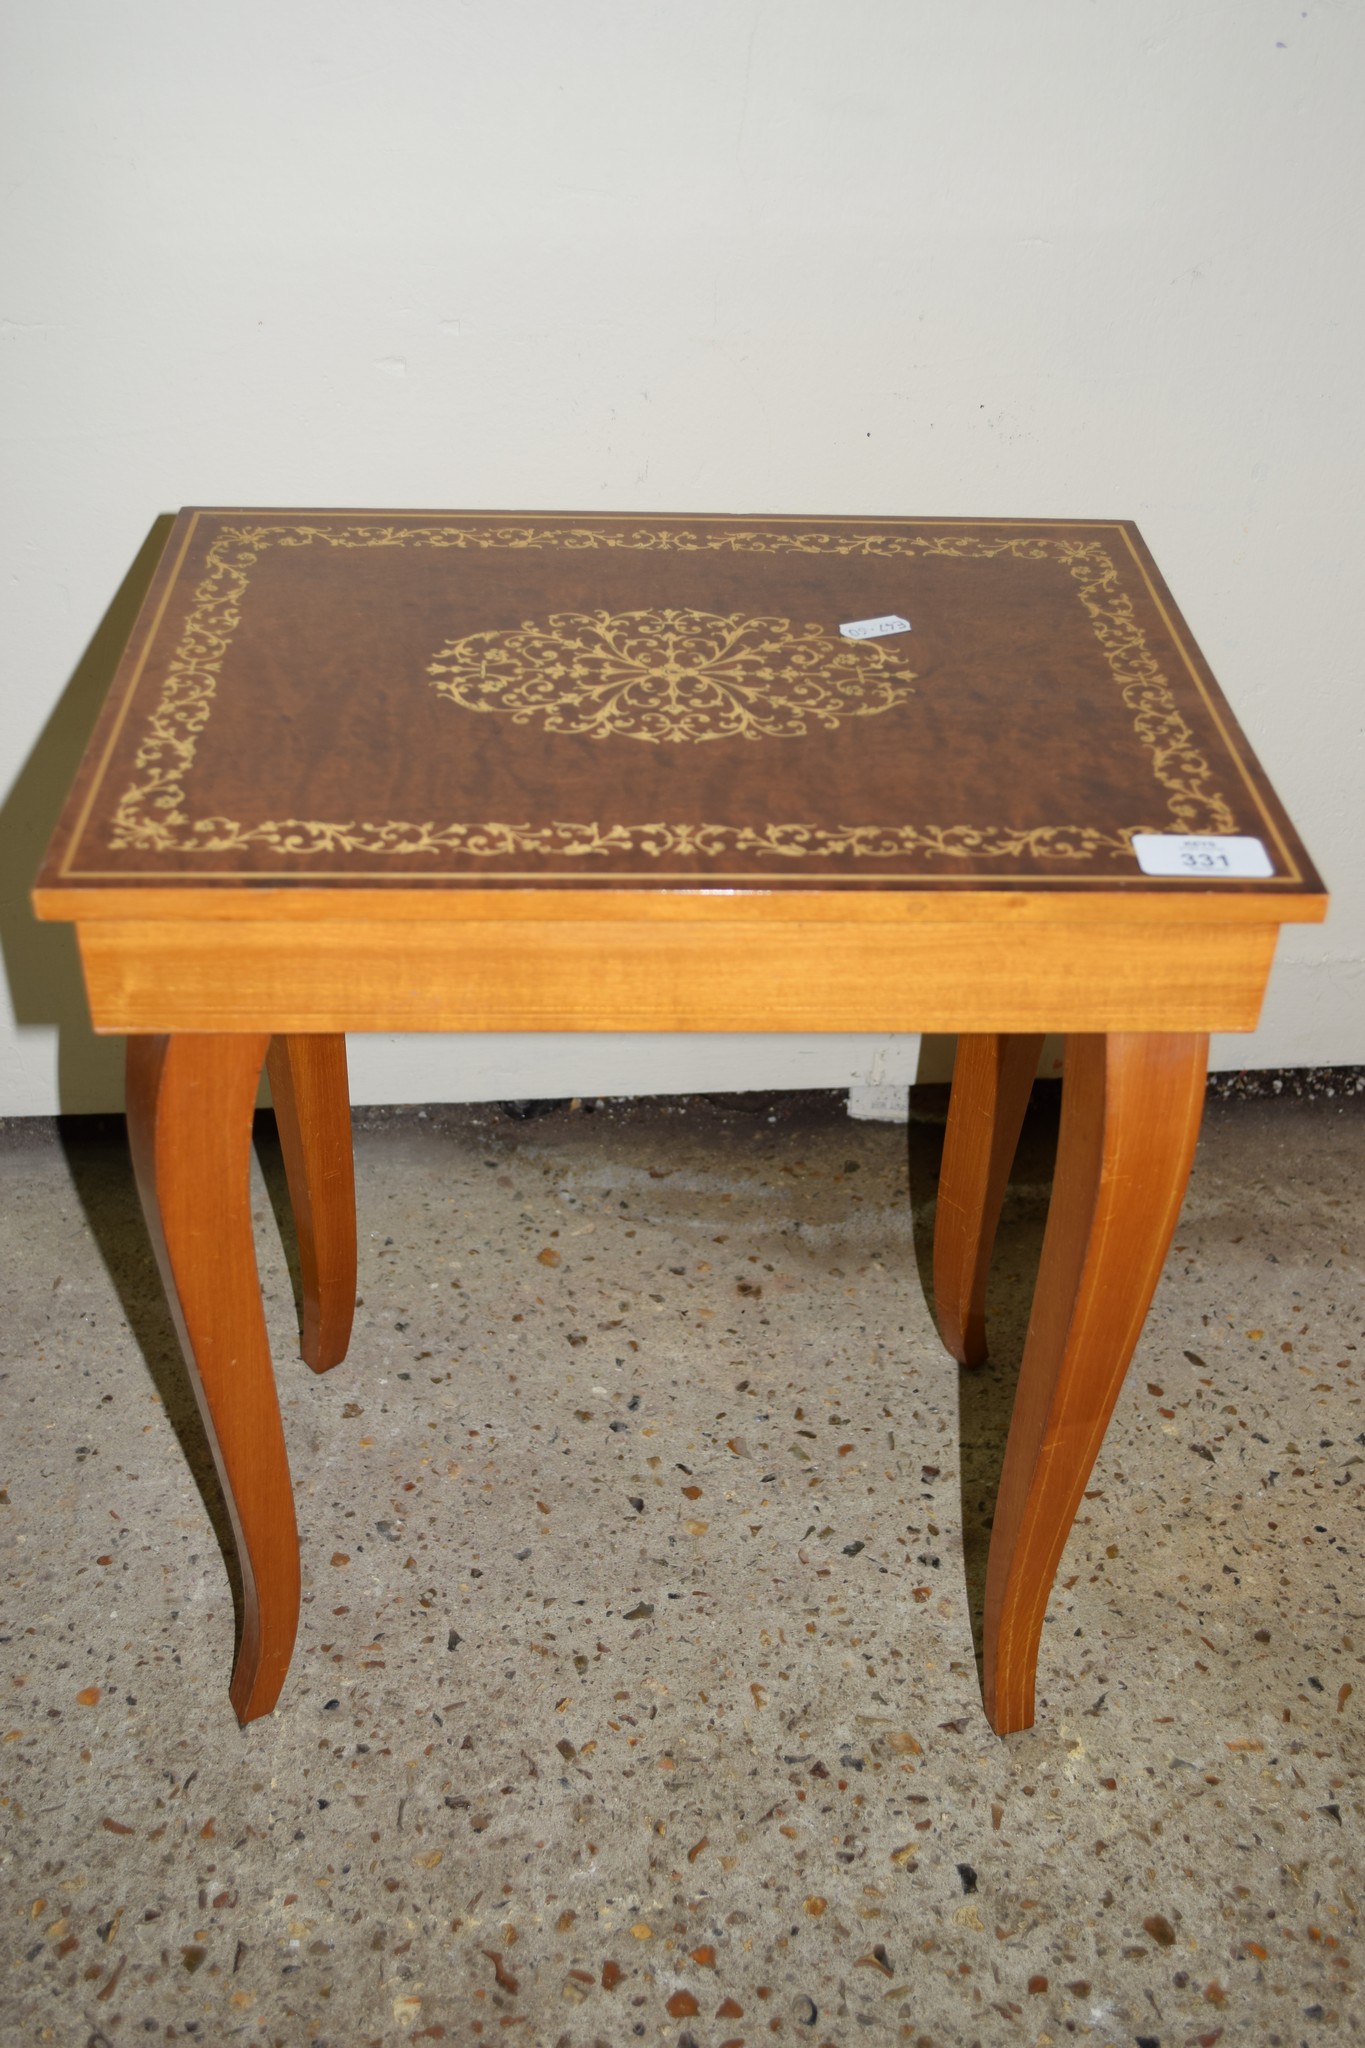 SMALL OCCASIONAL TABLE WITH DECORATIVE INLAID TOP, WIDTH APPROX 37CM